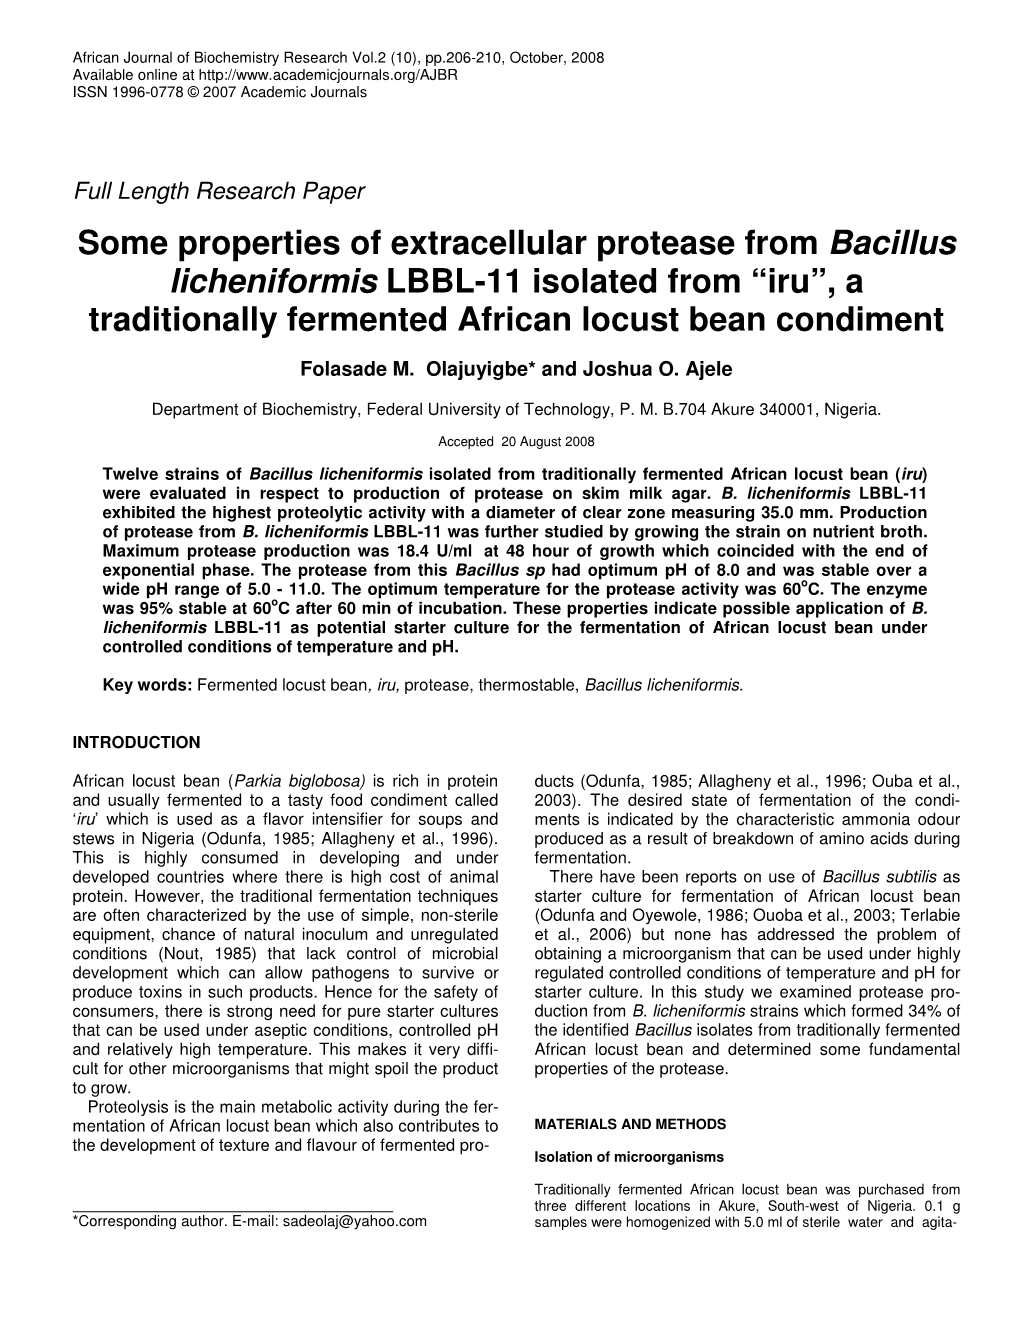 Some Properties of Extracellular Protease from Bacillus Licheniformis LBBL-11 Isolated from “Iru”, a Traditionally Fermented African Locust Bean Condiment